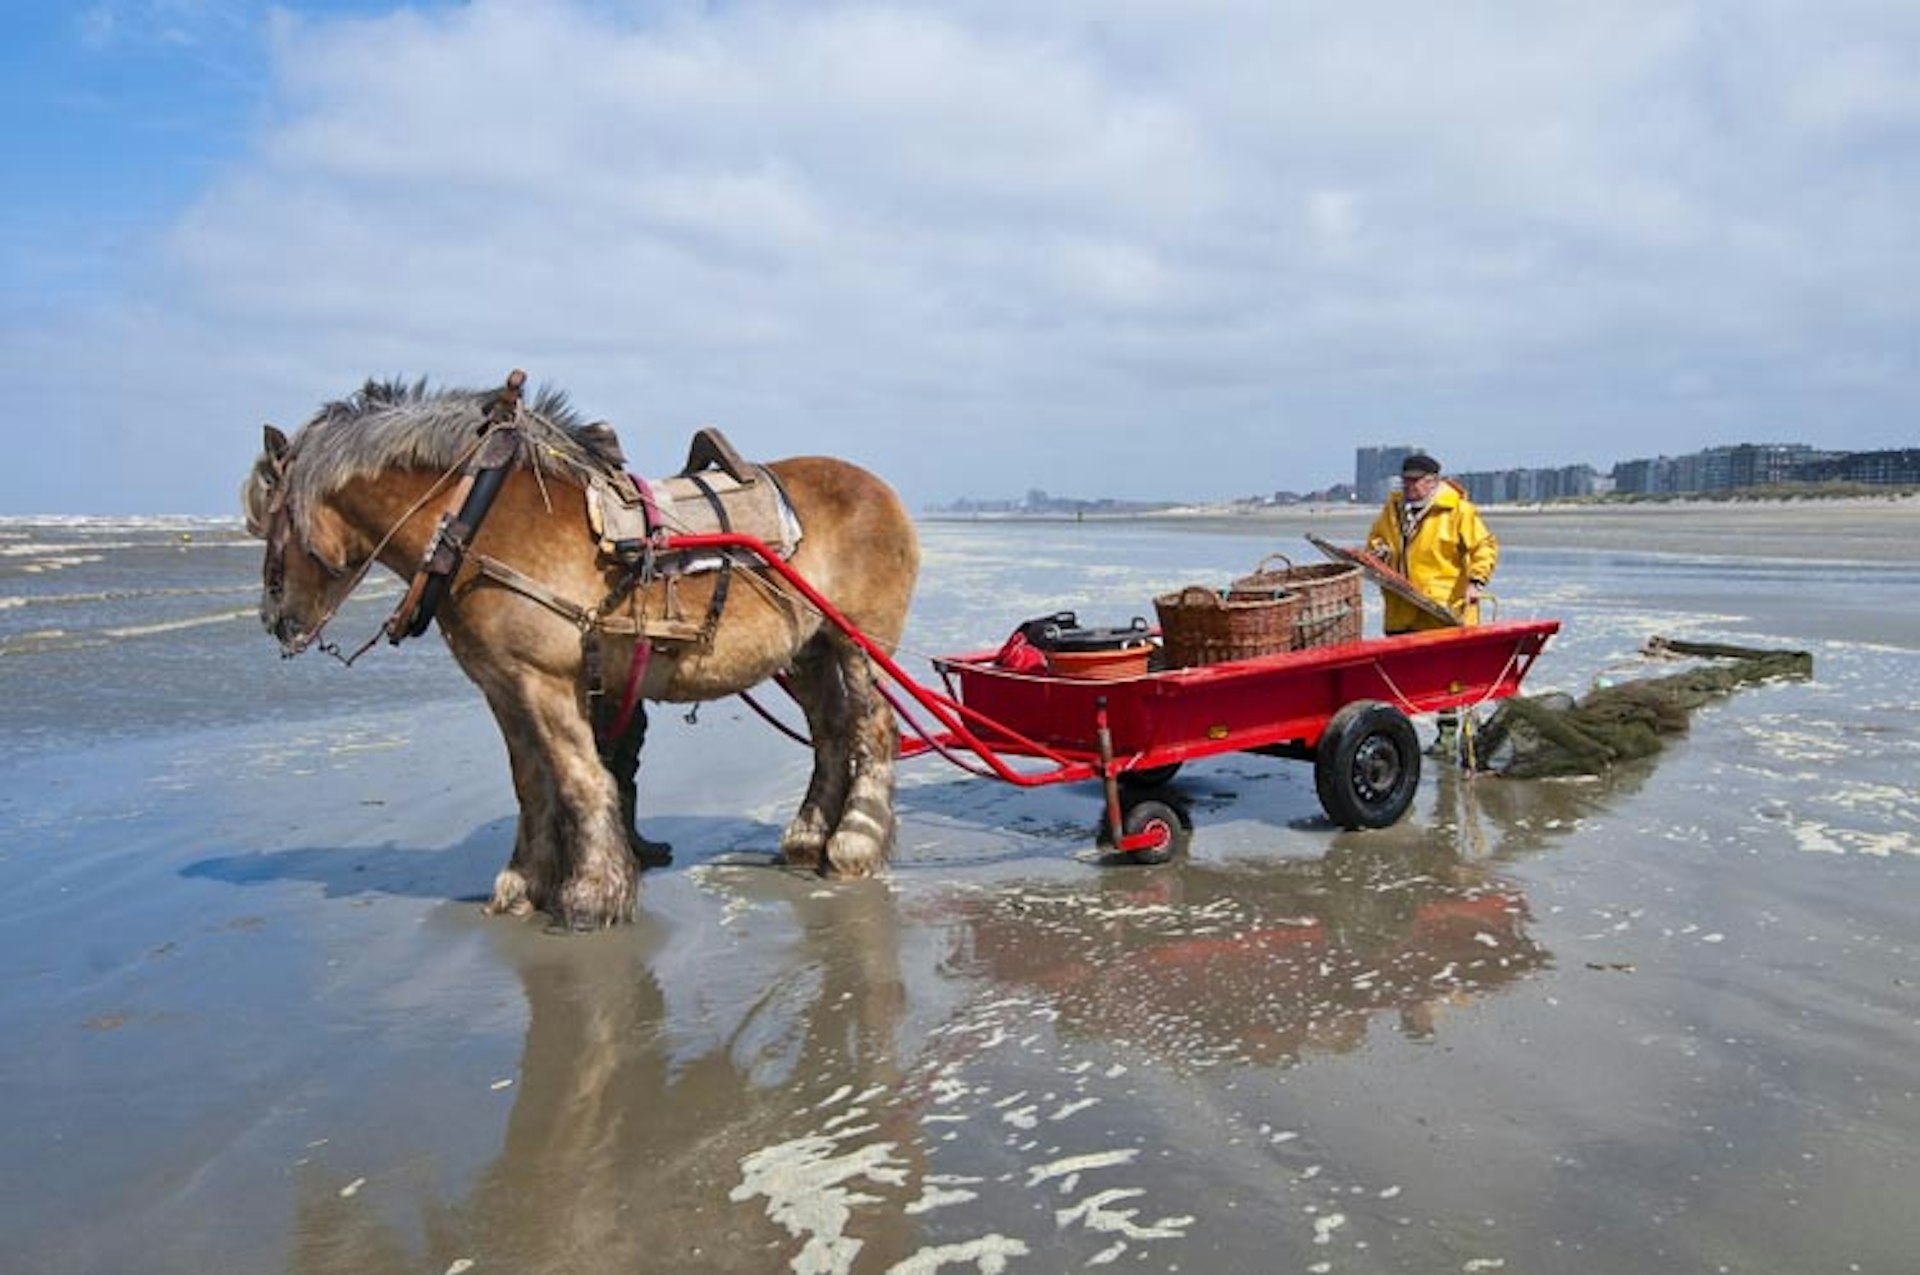 A shrimp fisherman and his plough horse in Oostduinkerke, Belgium. Image by Emilie Chaix / Getty Images